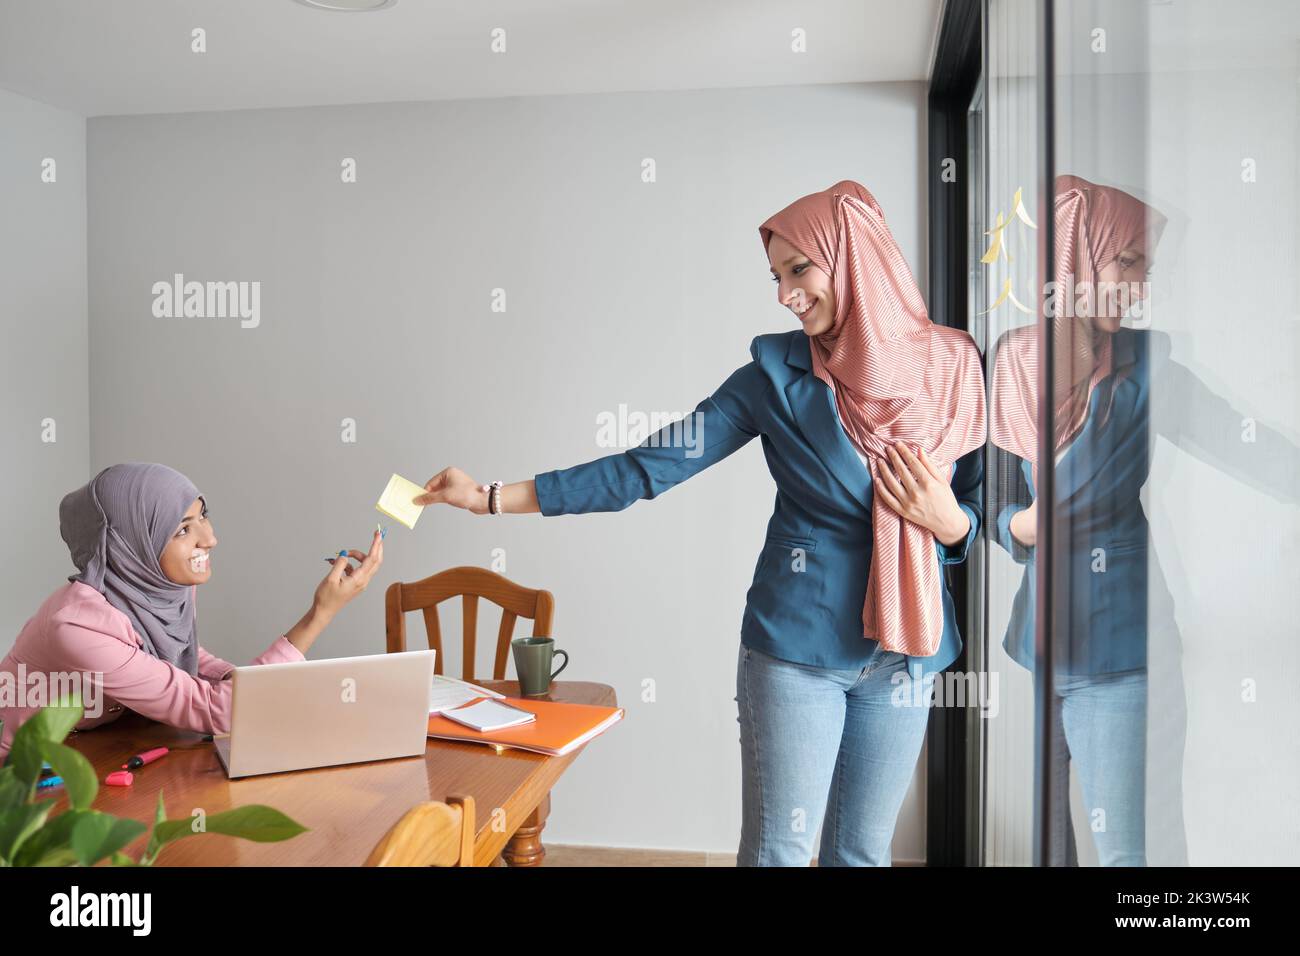 Two muslim women using sticky notes on windows to plan a marketing strategy. Stock Photo